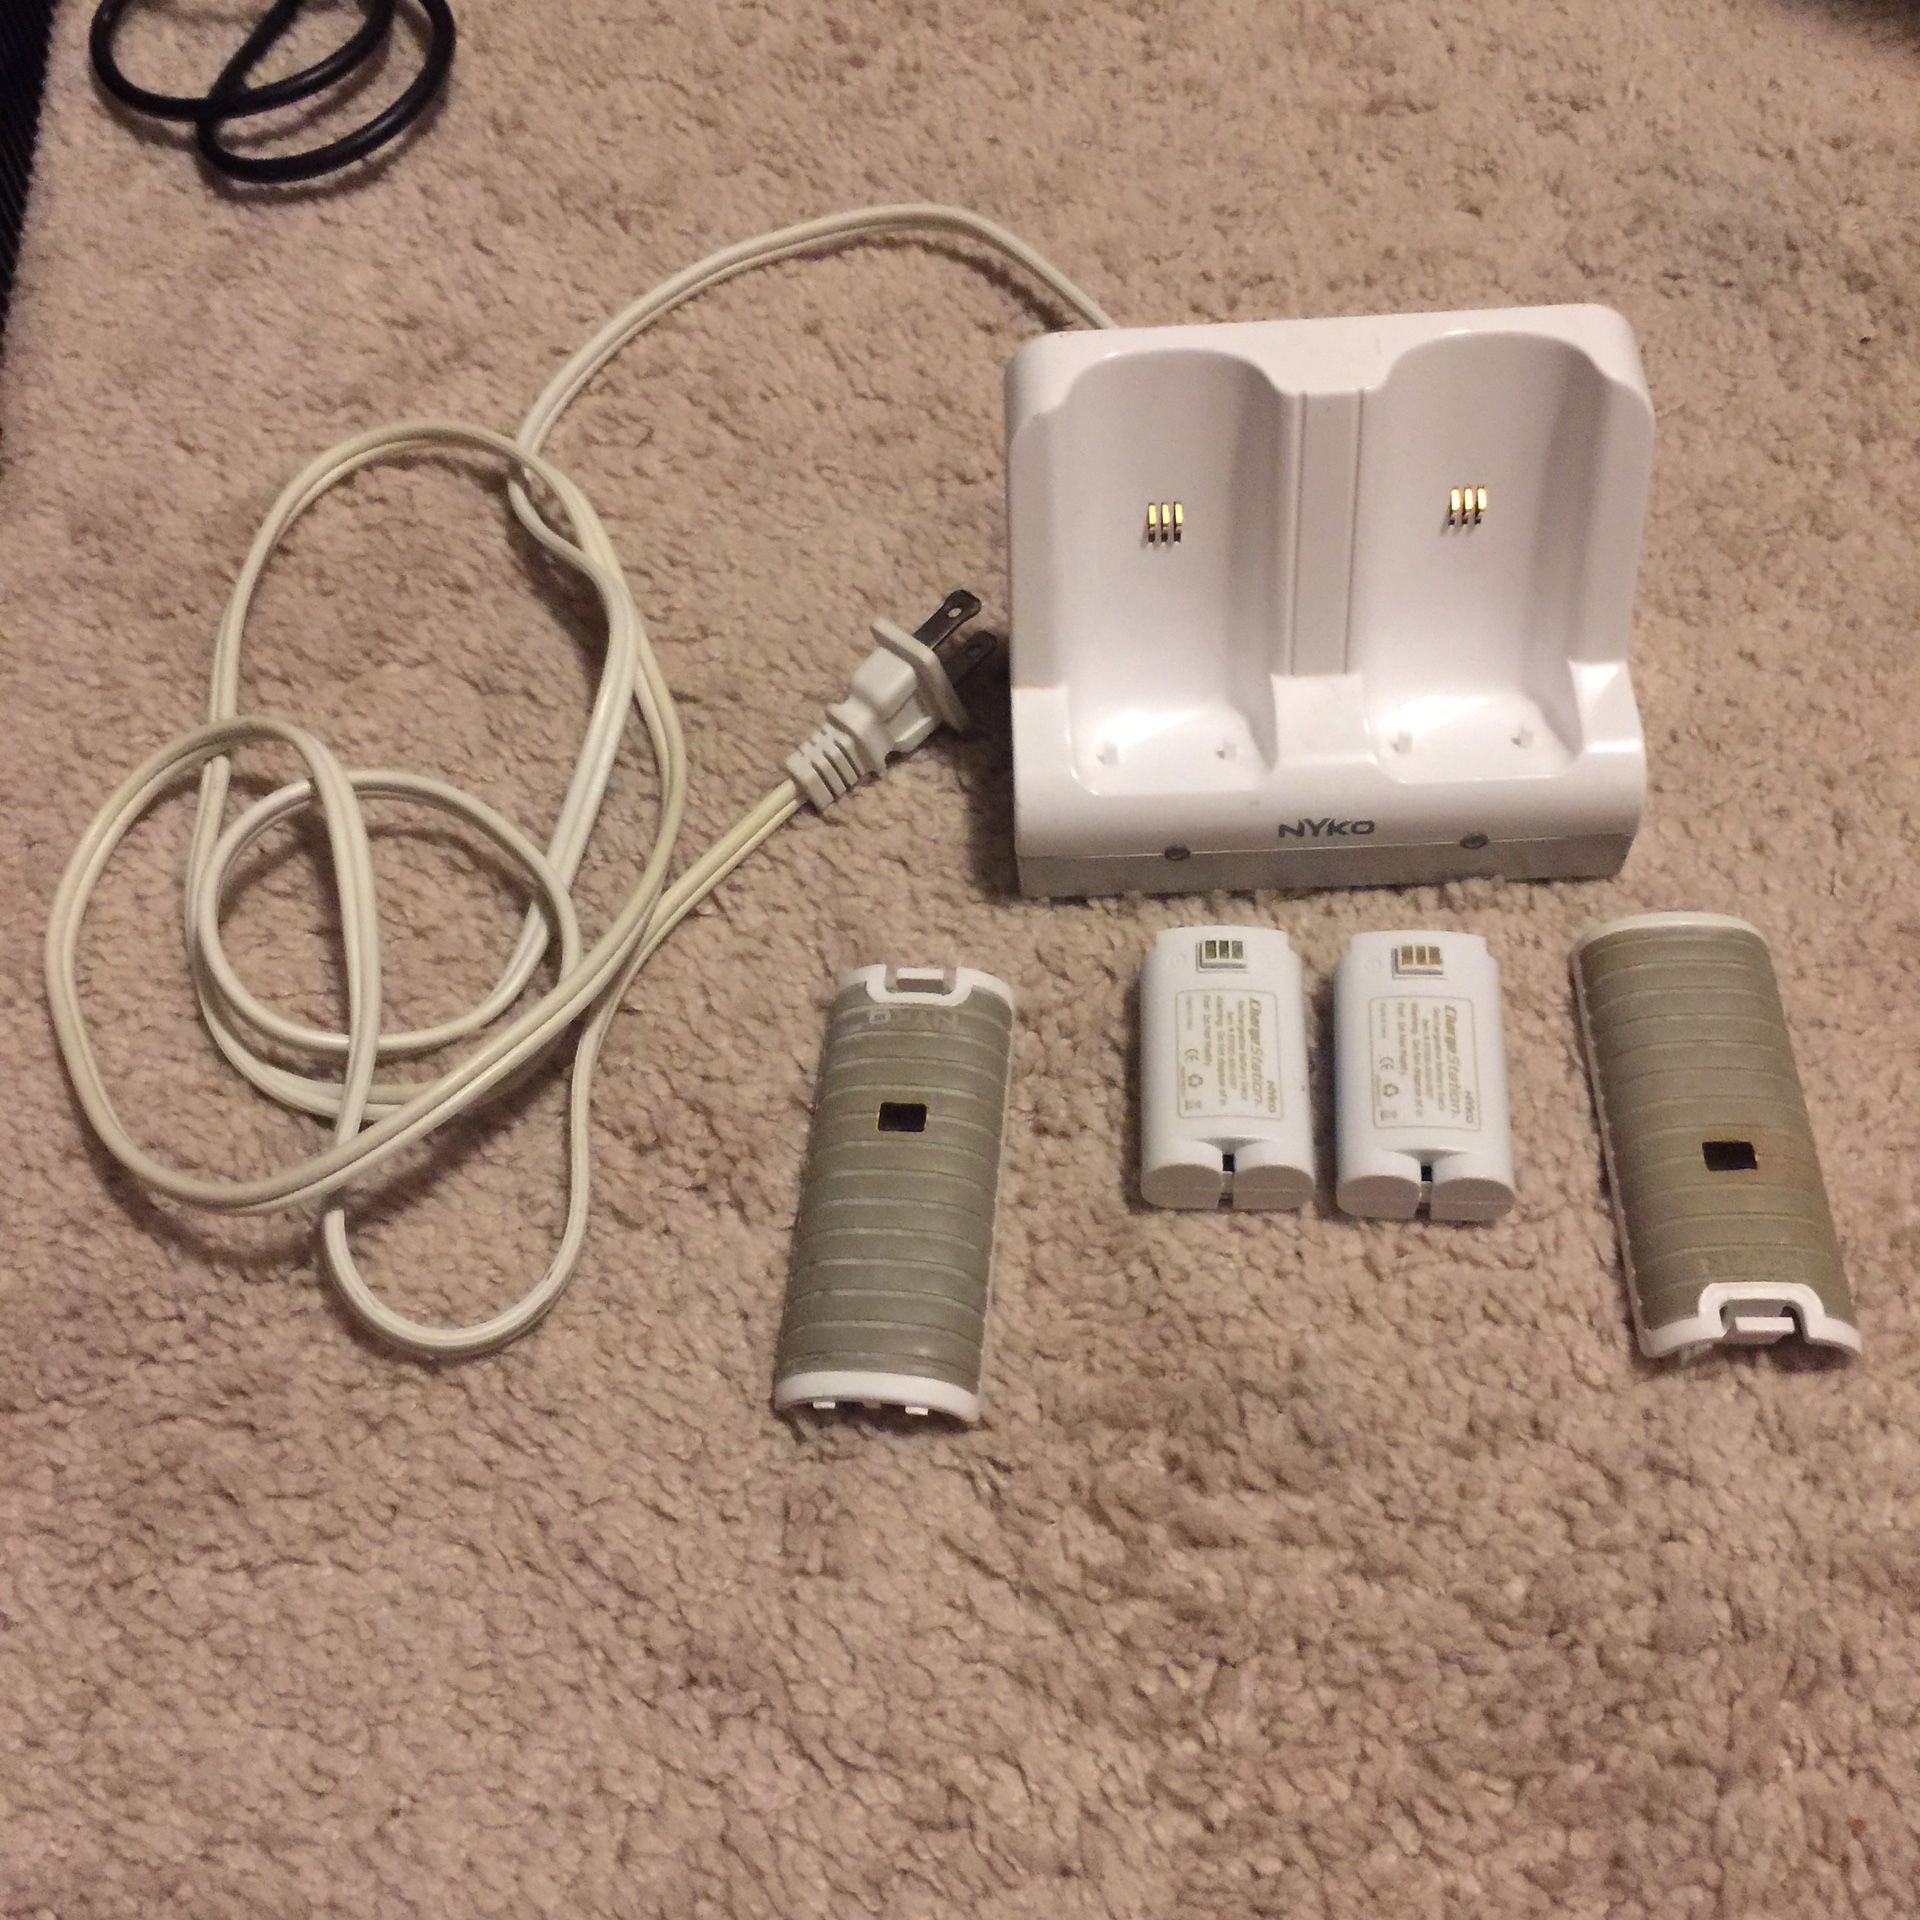 NYCO Wii Charging Station